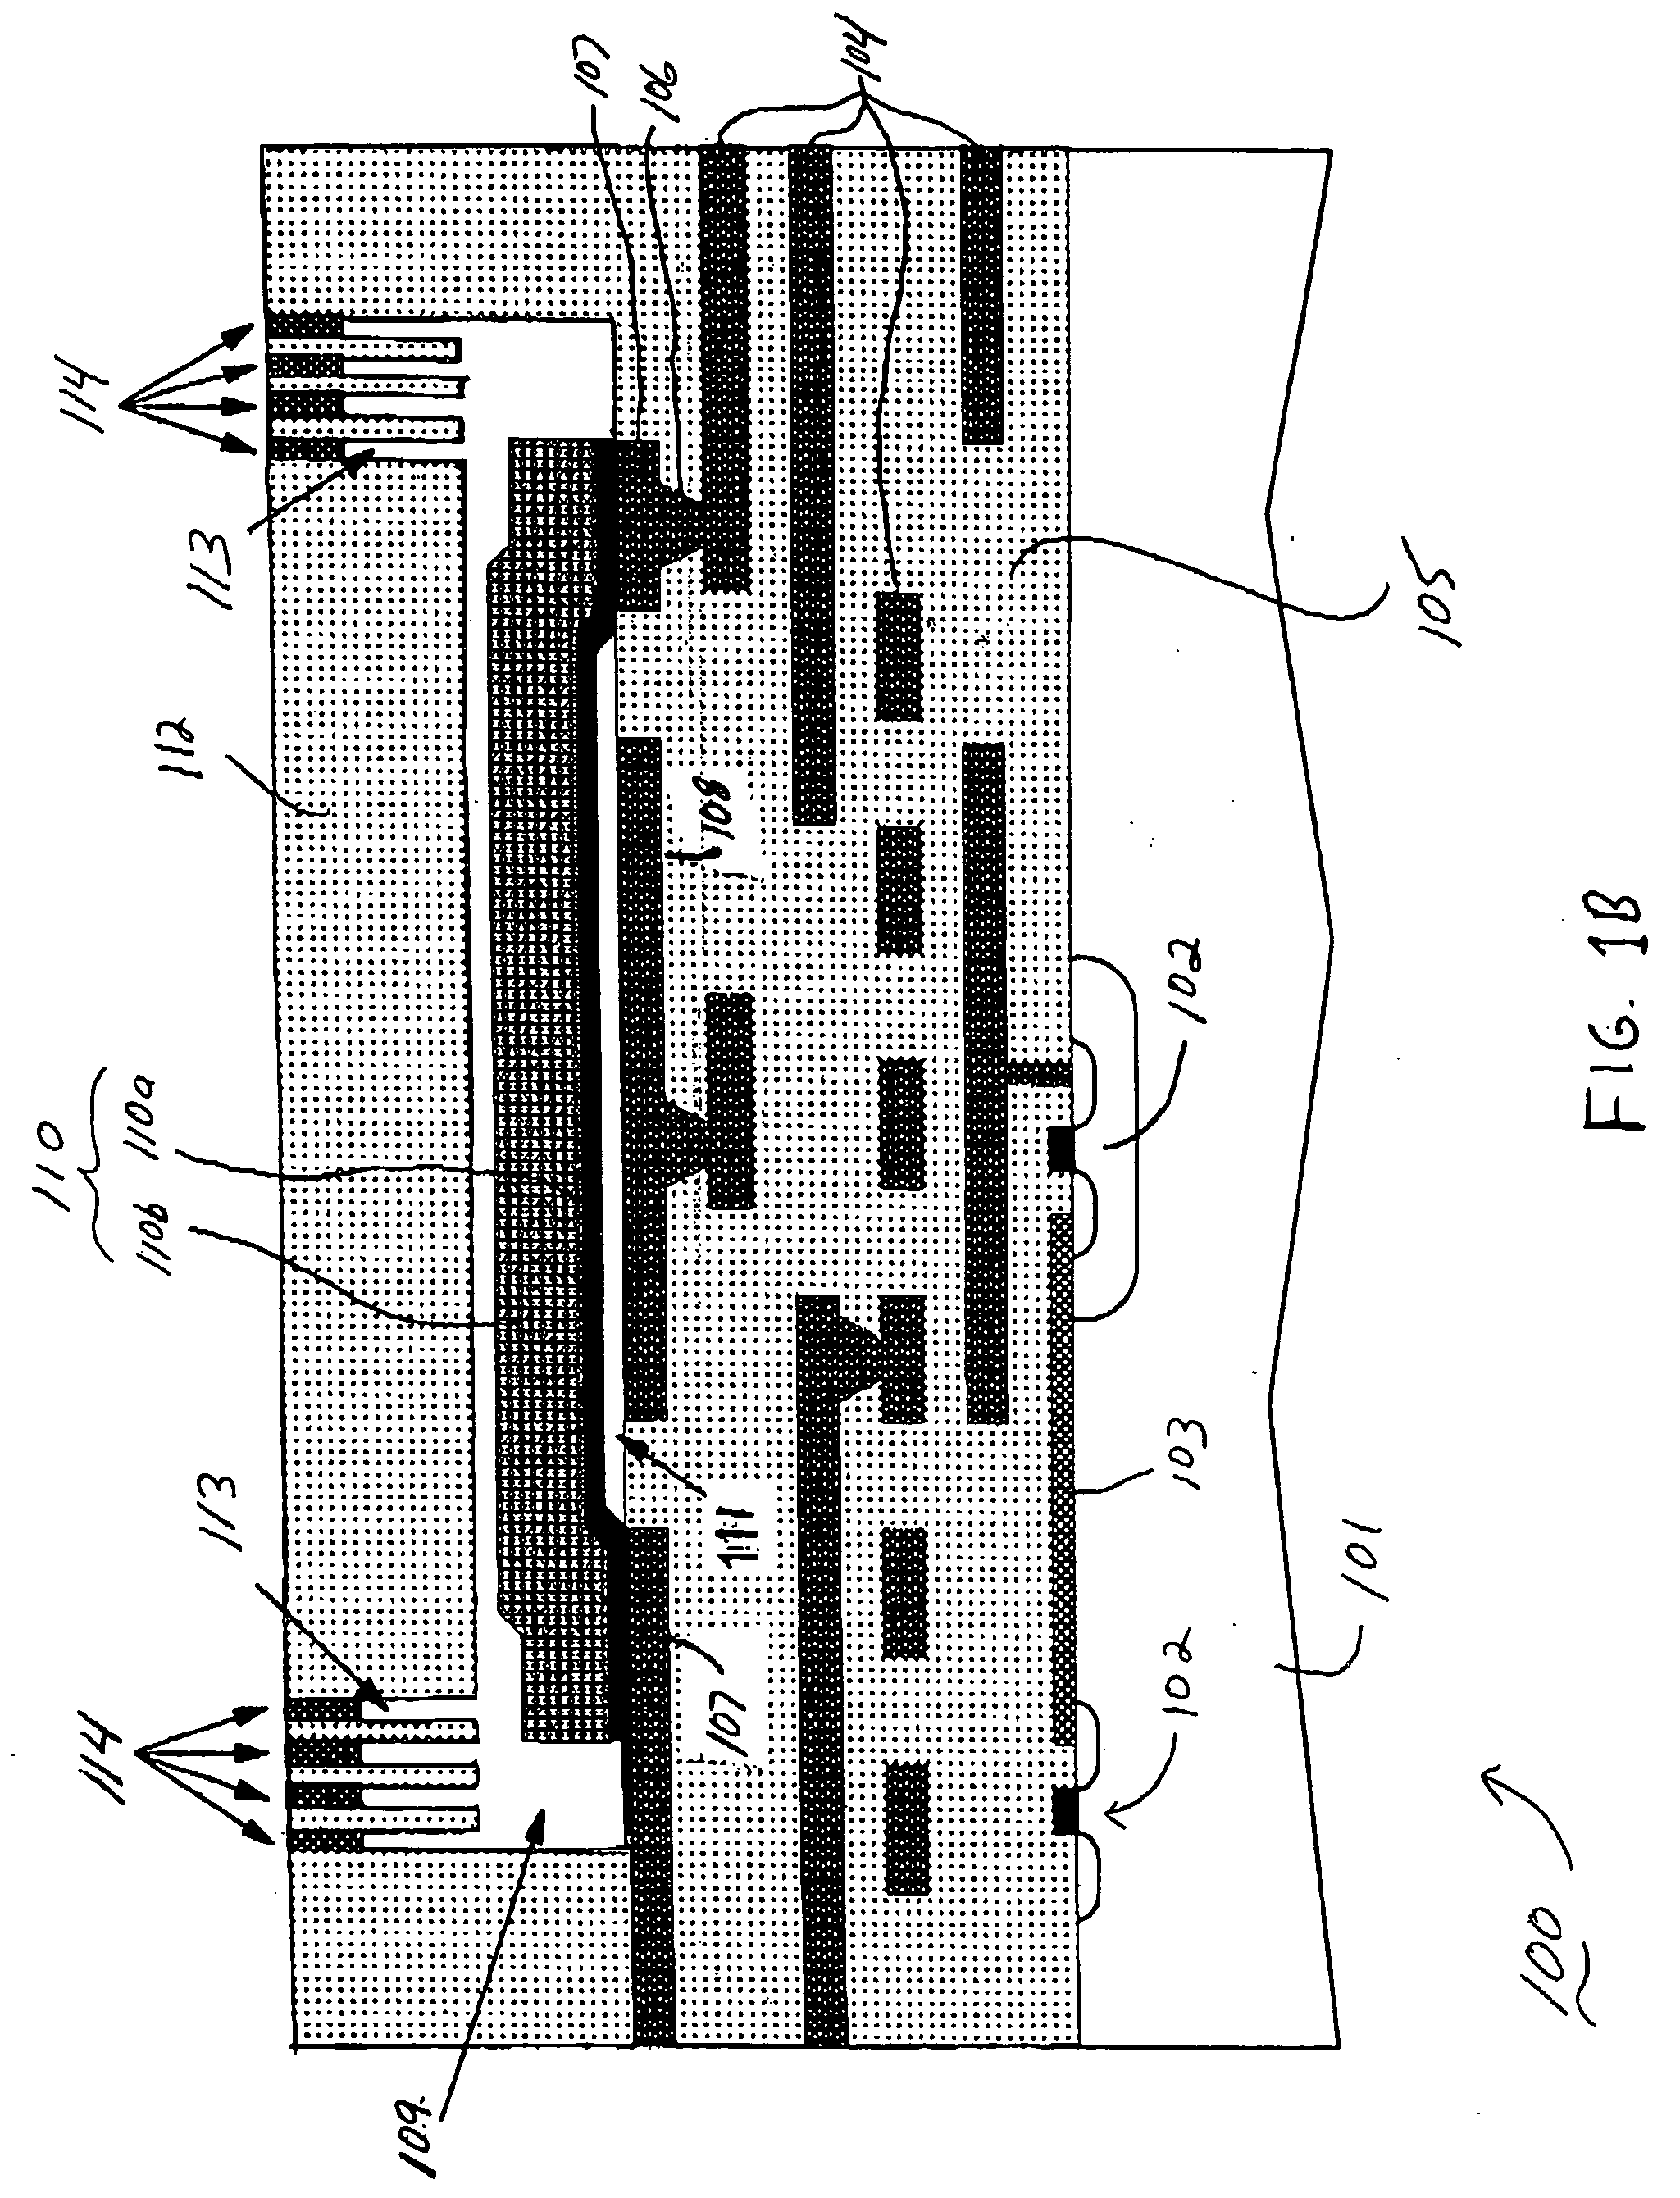 Apparatus and methods for encapsulating microelectromechanical (MEM) devices on a wafer scale